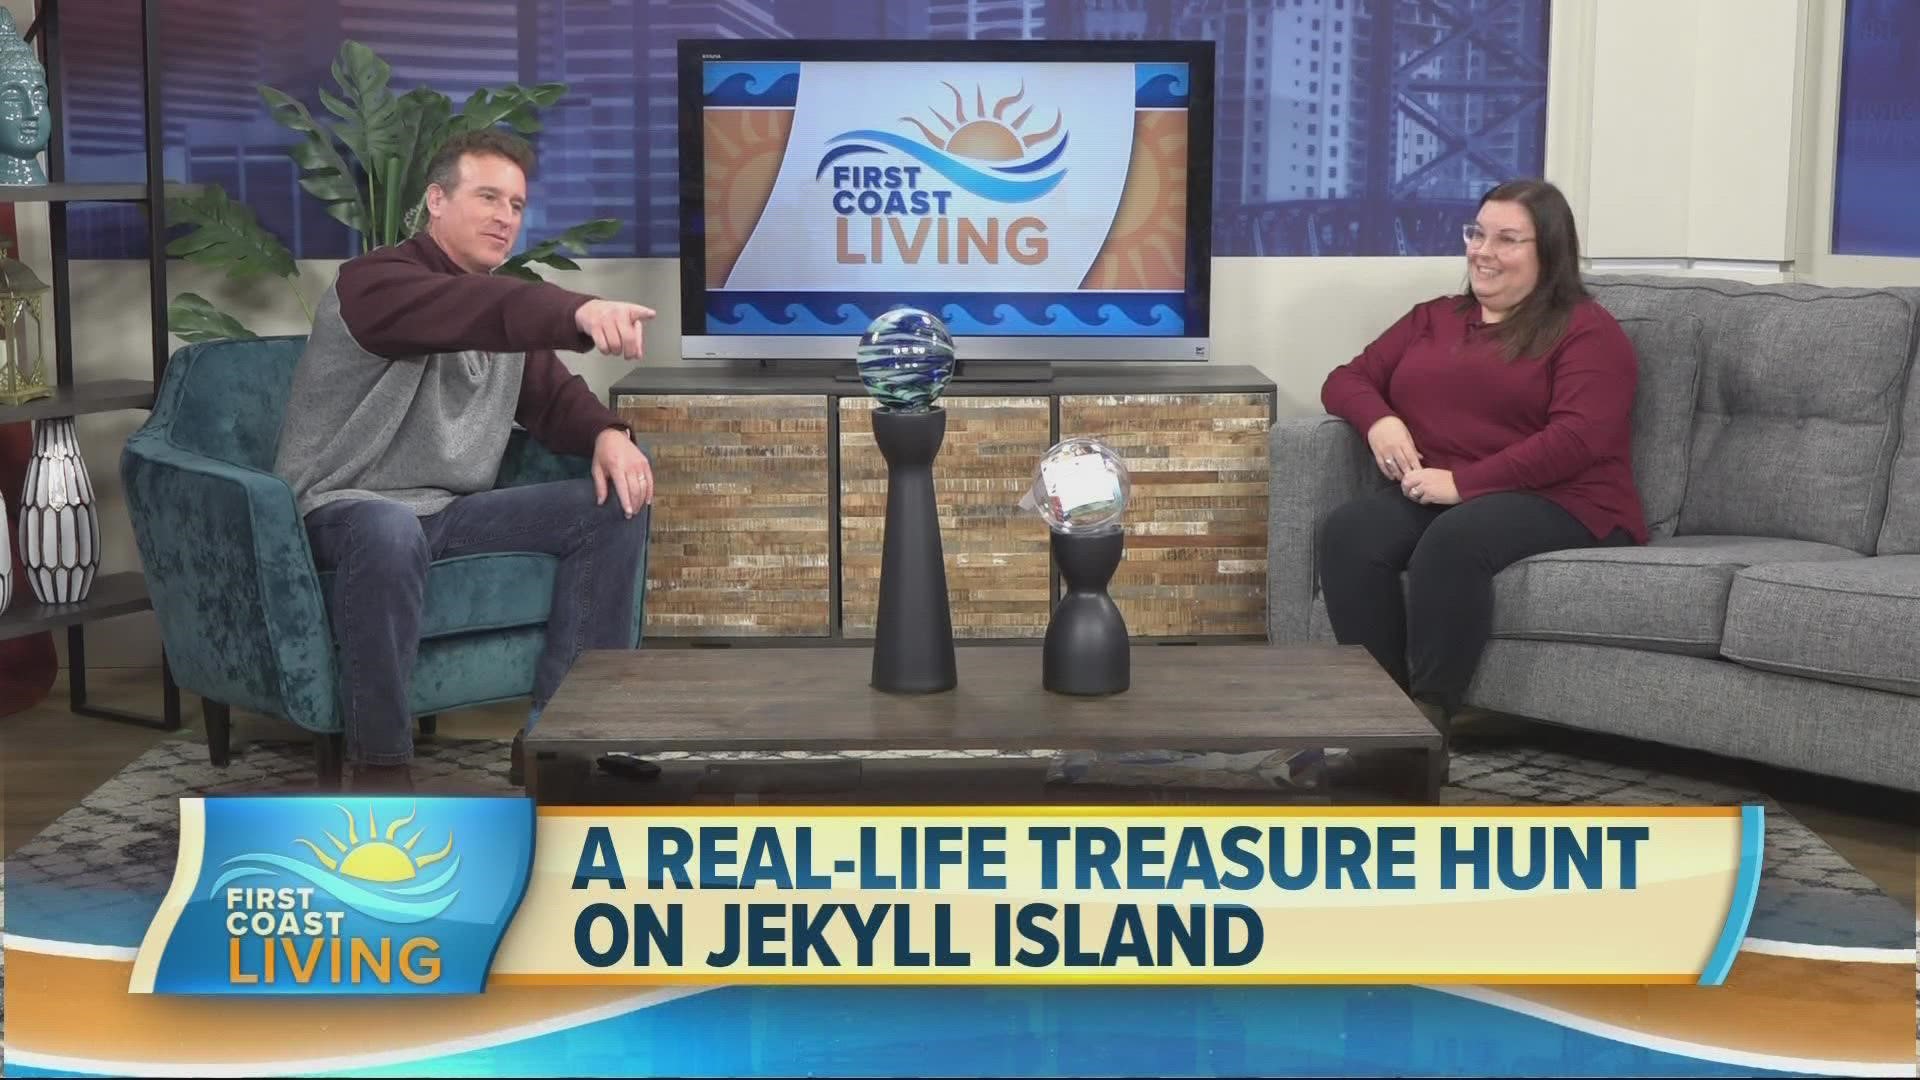 Kathryn Hearn, Marketing Communications Manager of Jekyll Island joins us with all the bedazzling details of one-of-a-kind glass floats.